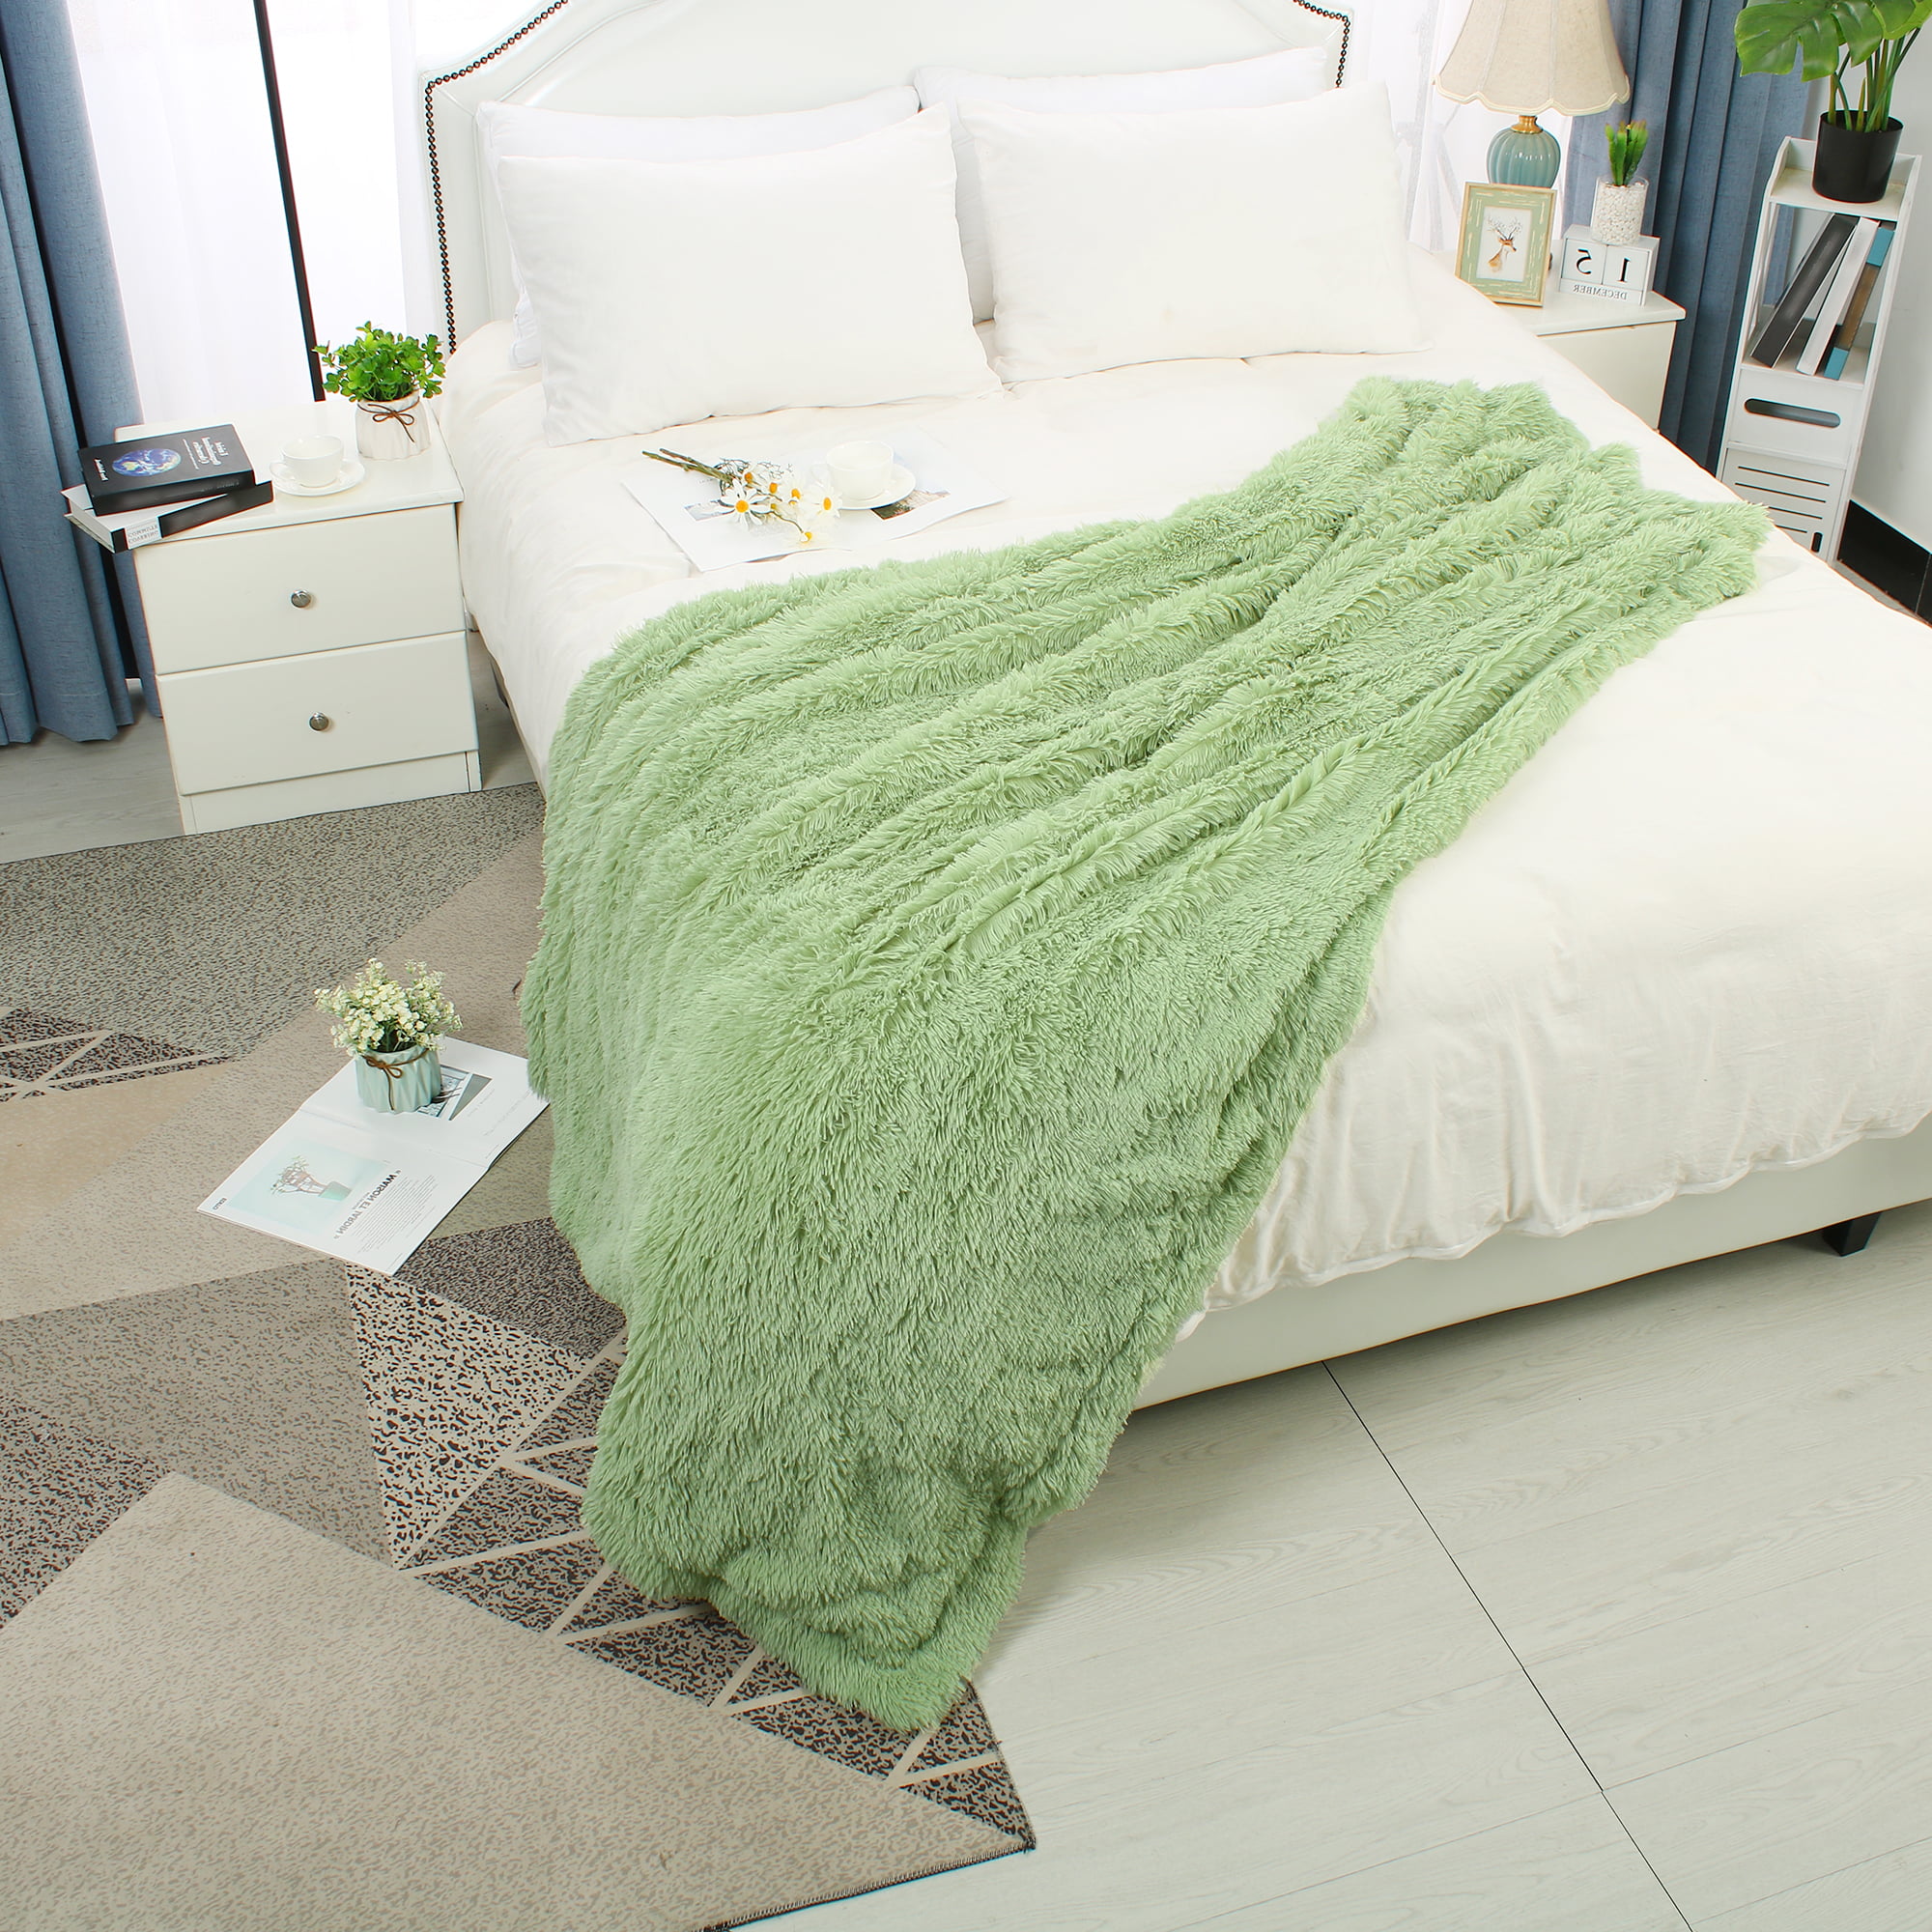 Details about   Fluffy Faux Fur Throw Blanket Bed Sofa Bedspread Large Long Shaggy Plush Blanket 